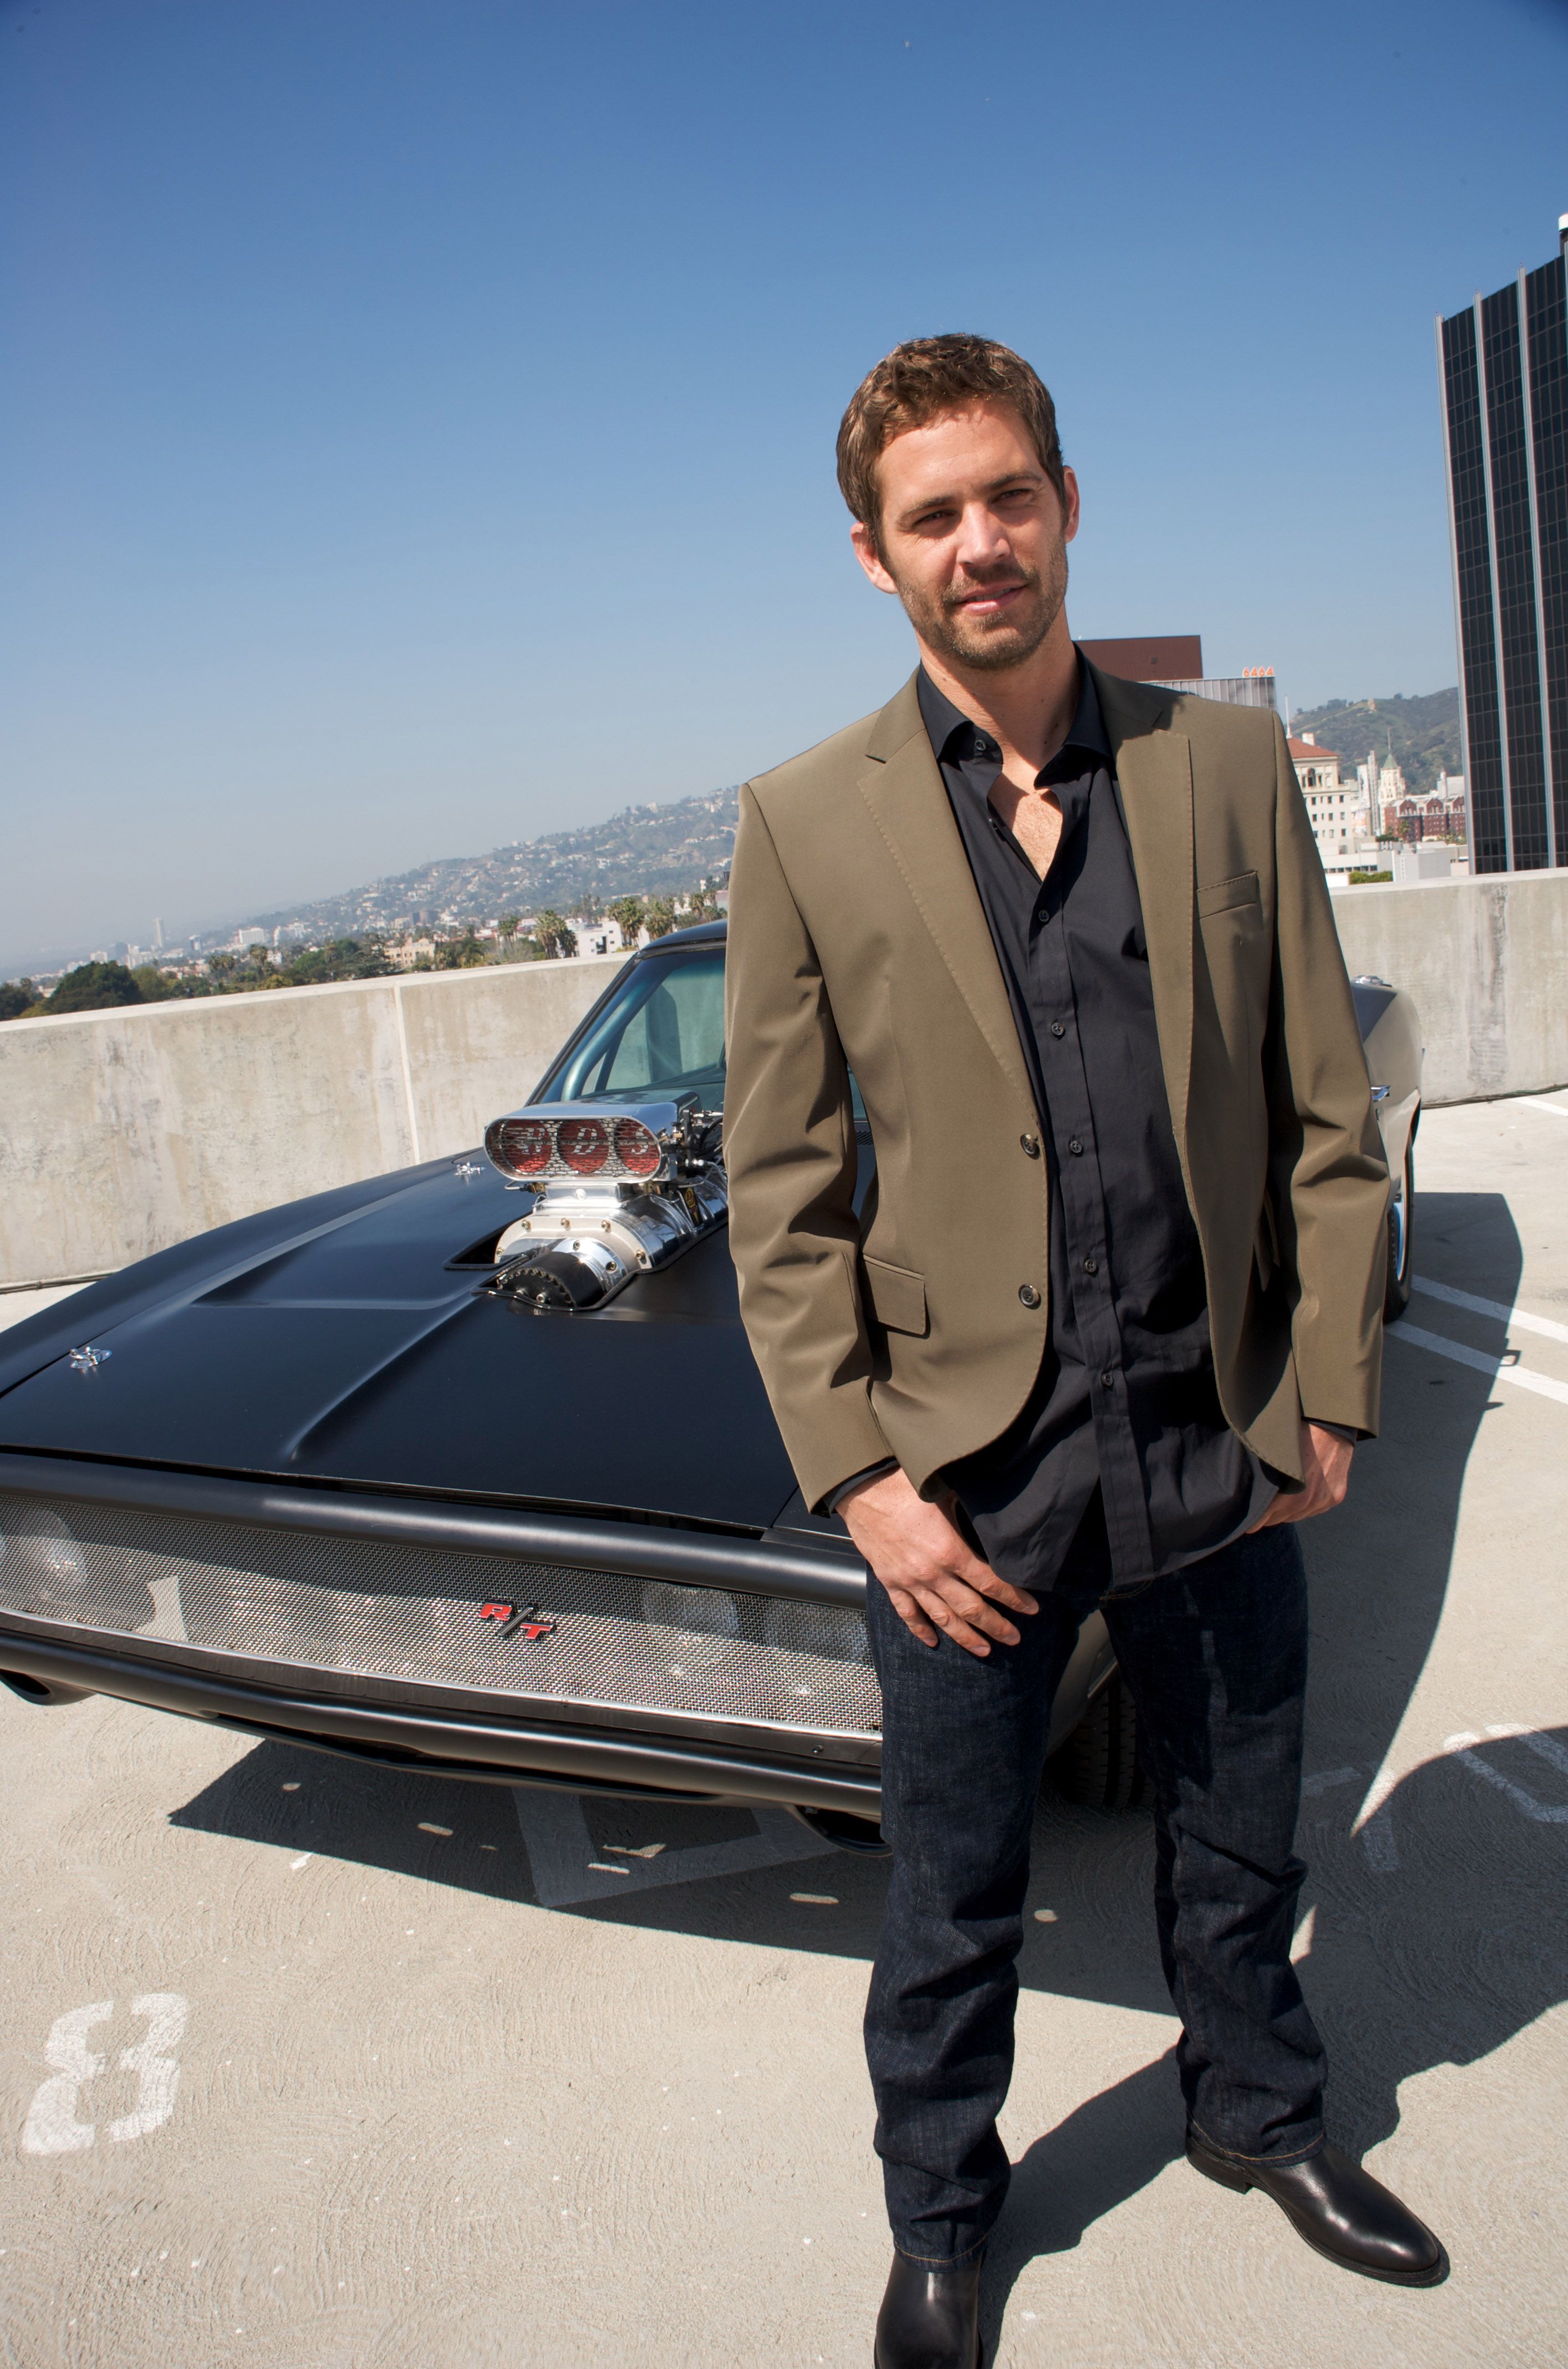 Paul Walker at the "Fast & Furious" press conference on March 13, 2009. | Photo: Getty Images